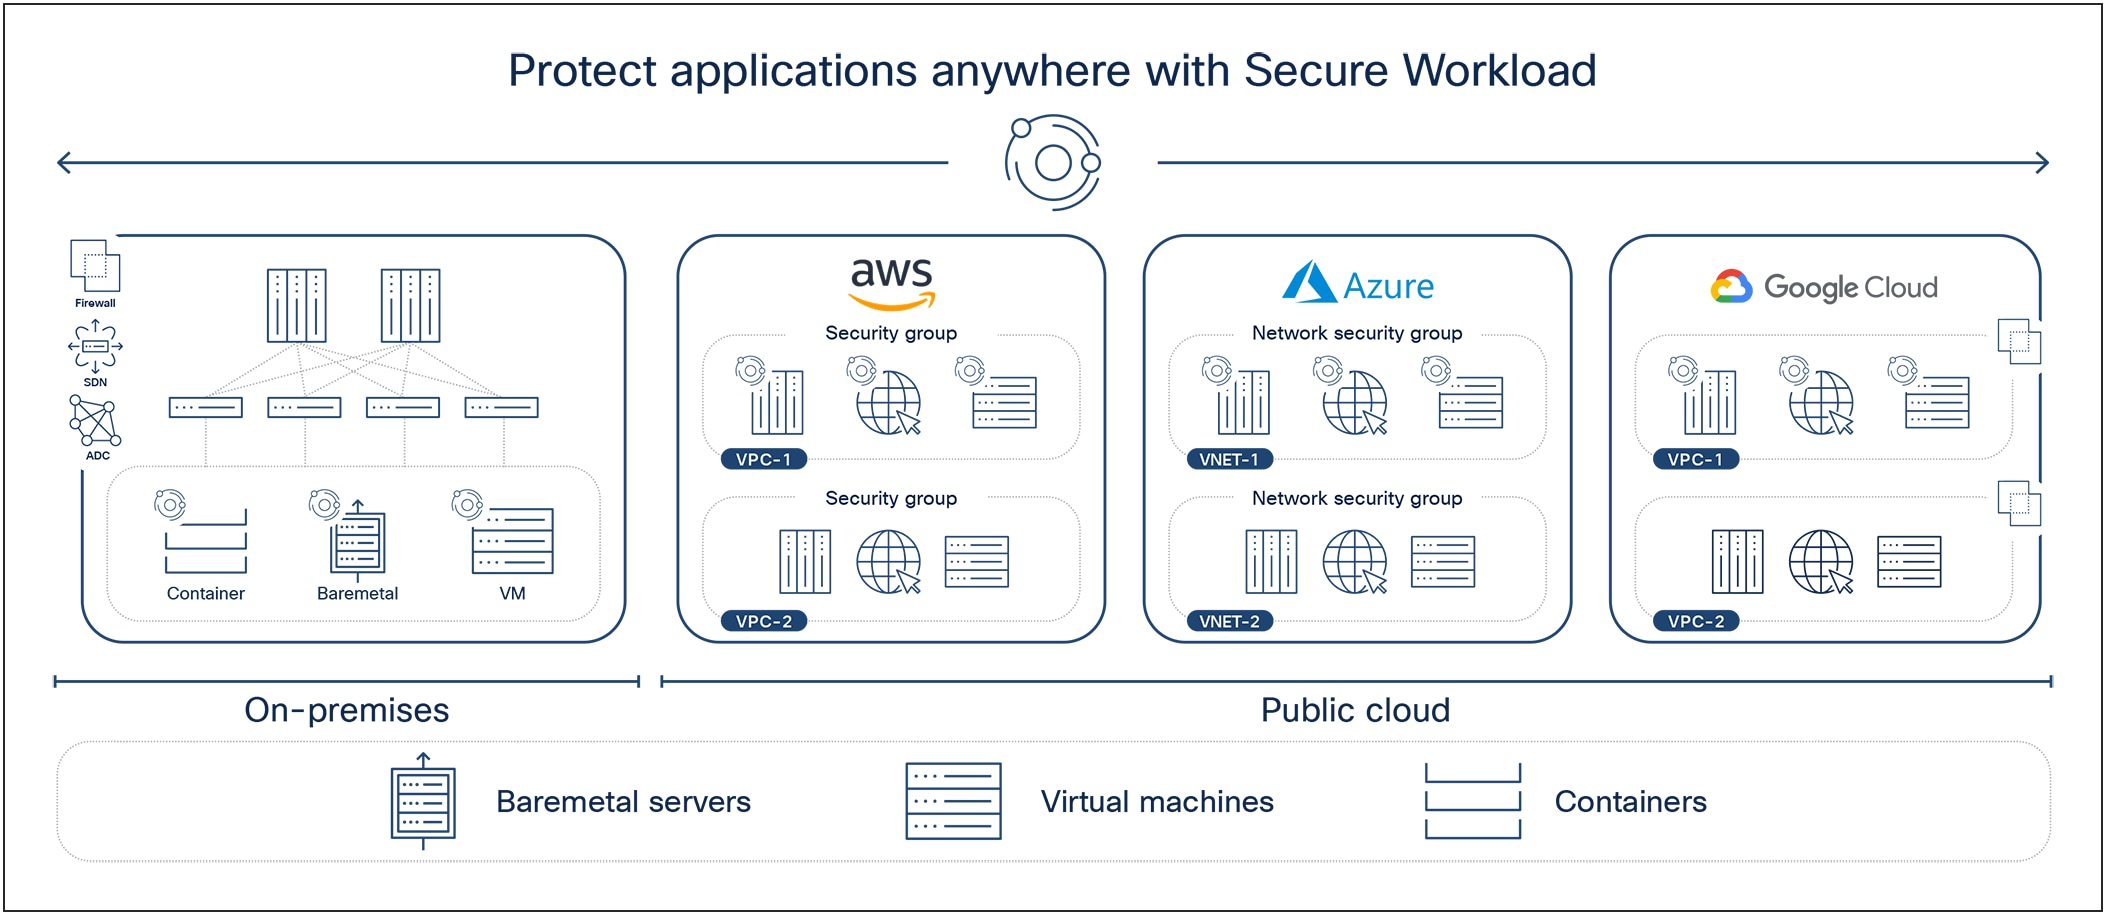 Protect applications anywhere with Secure Workload